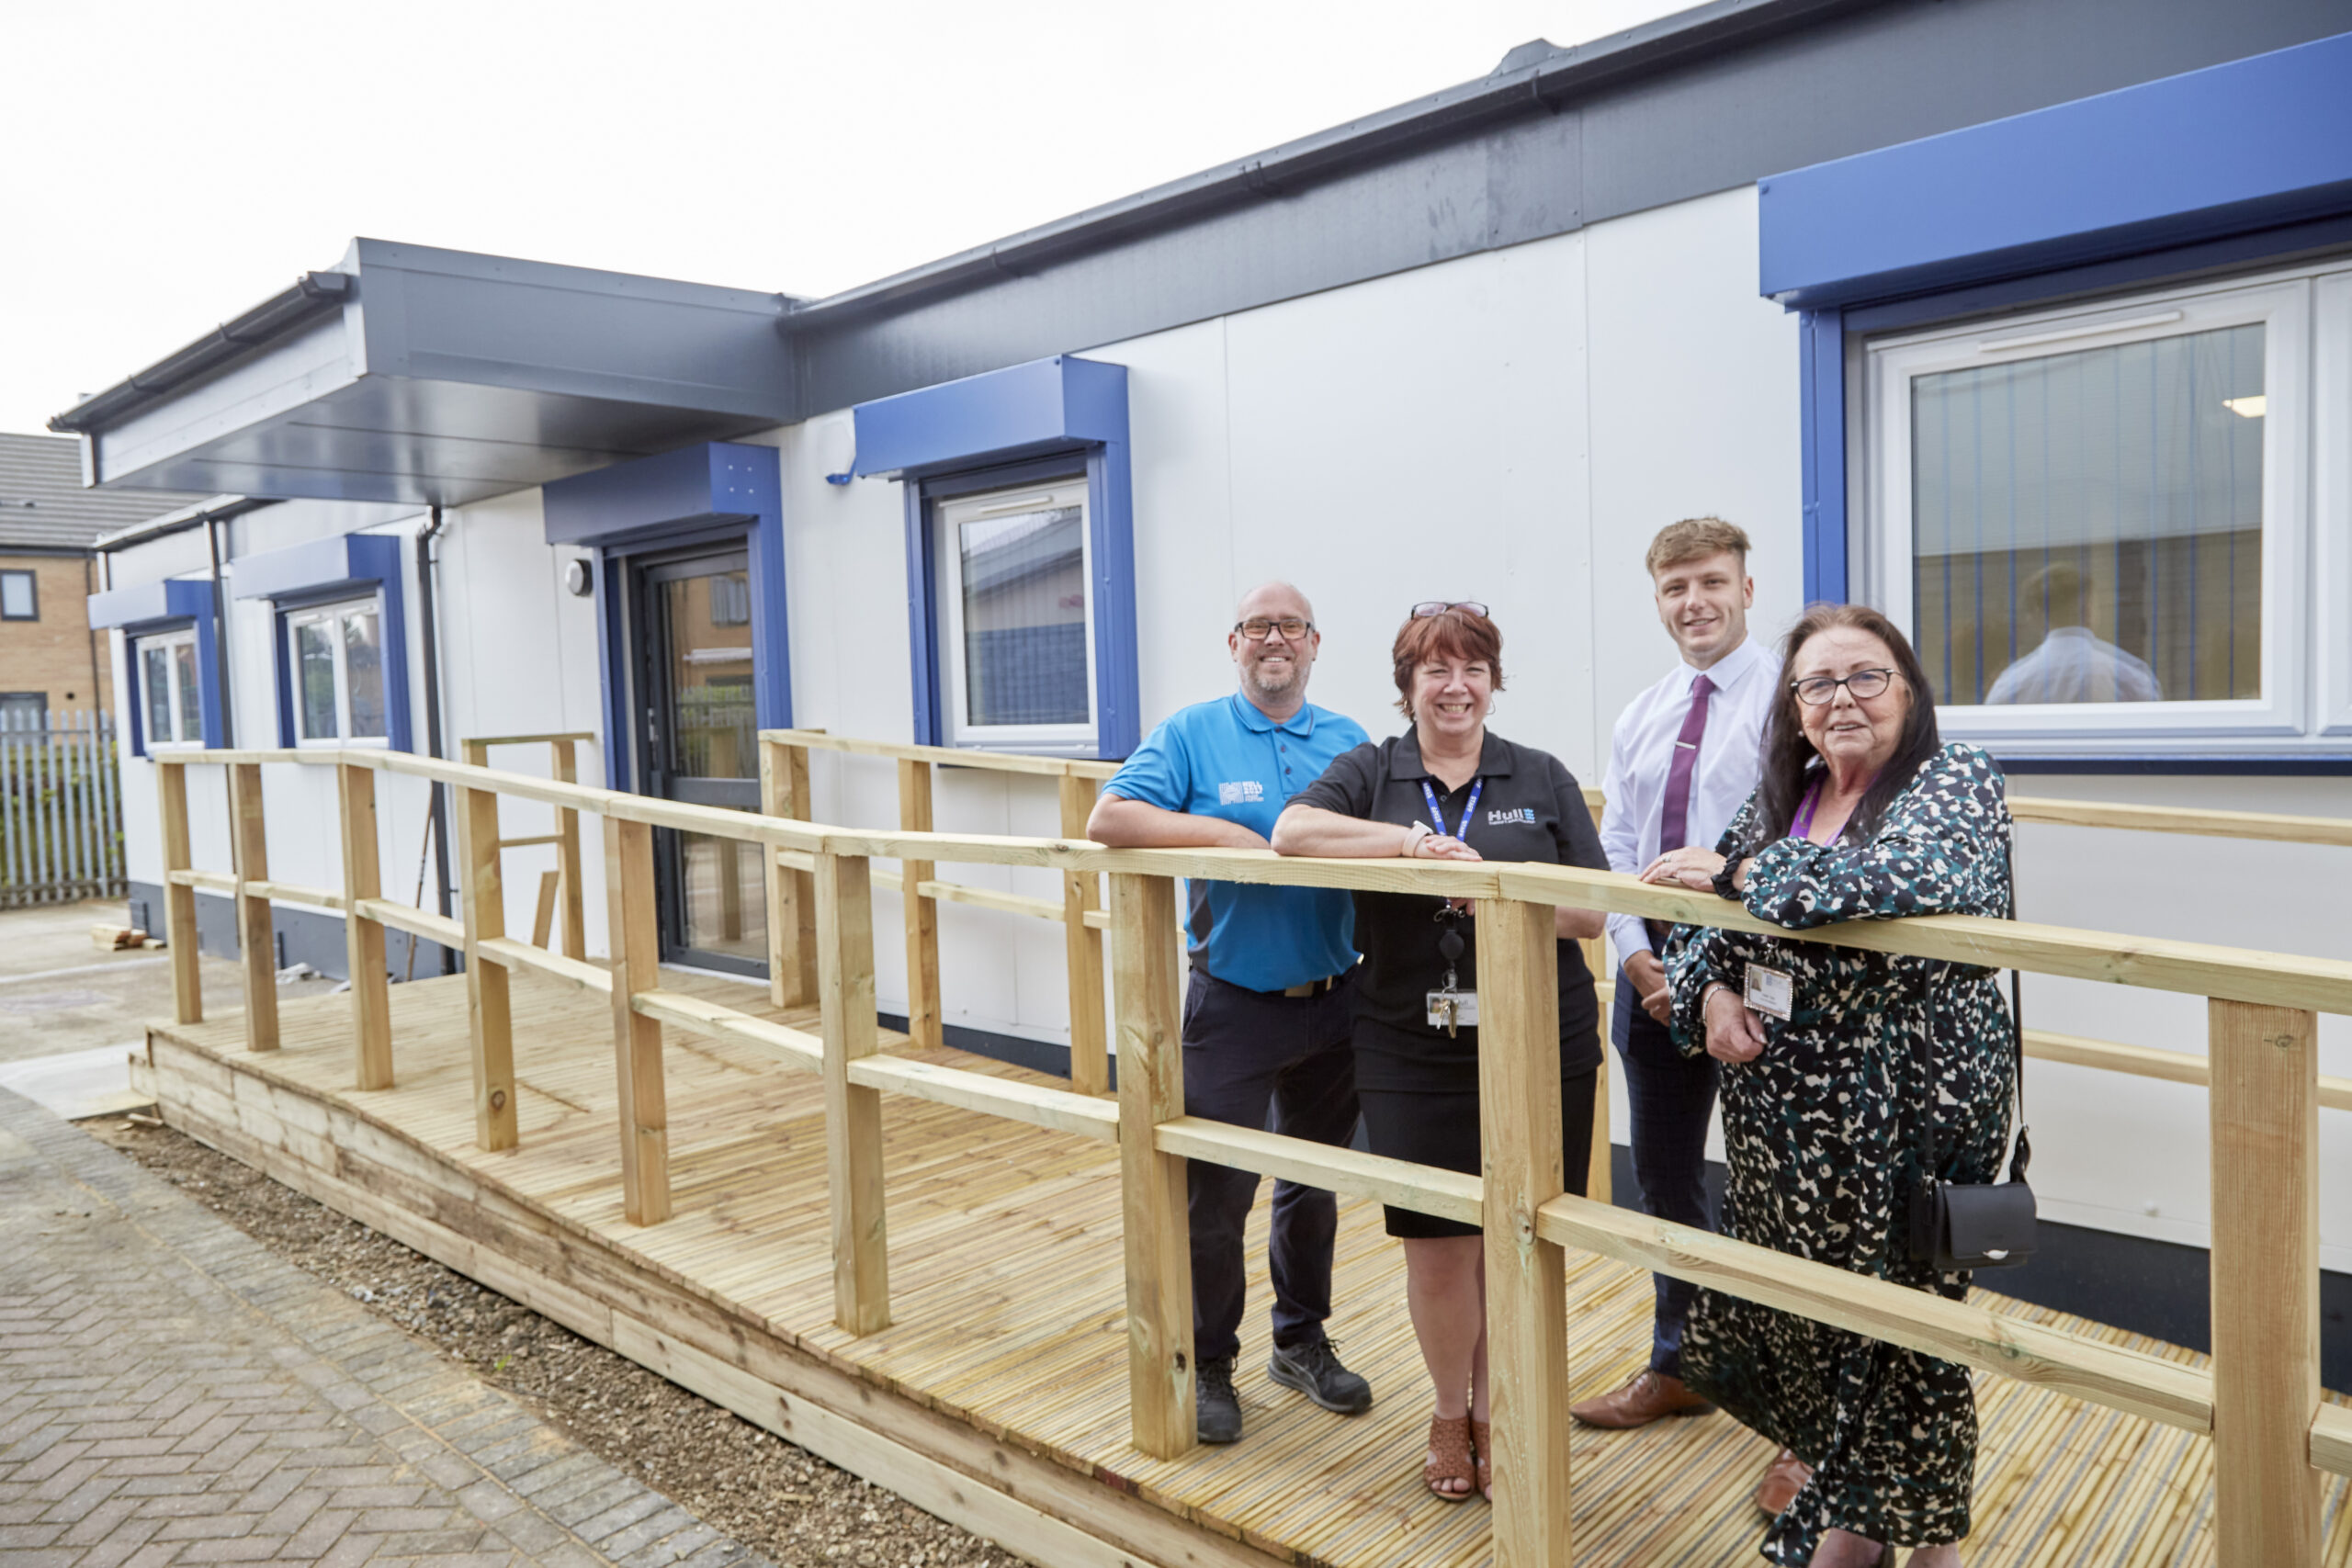 Graham Lawson of Sewell Construction, Amanda Skinner of HTAE, Harry Hopkin of Esteem and Councillor Linda Tock of Hull City Council stand outside the new classrooms